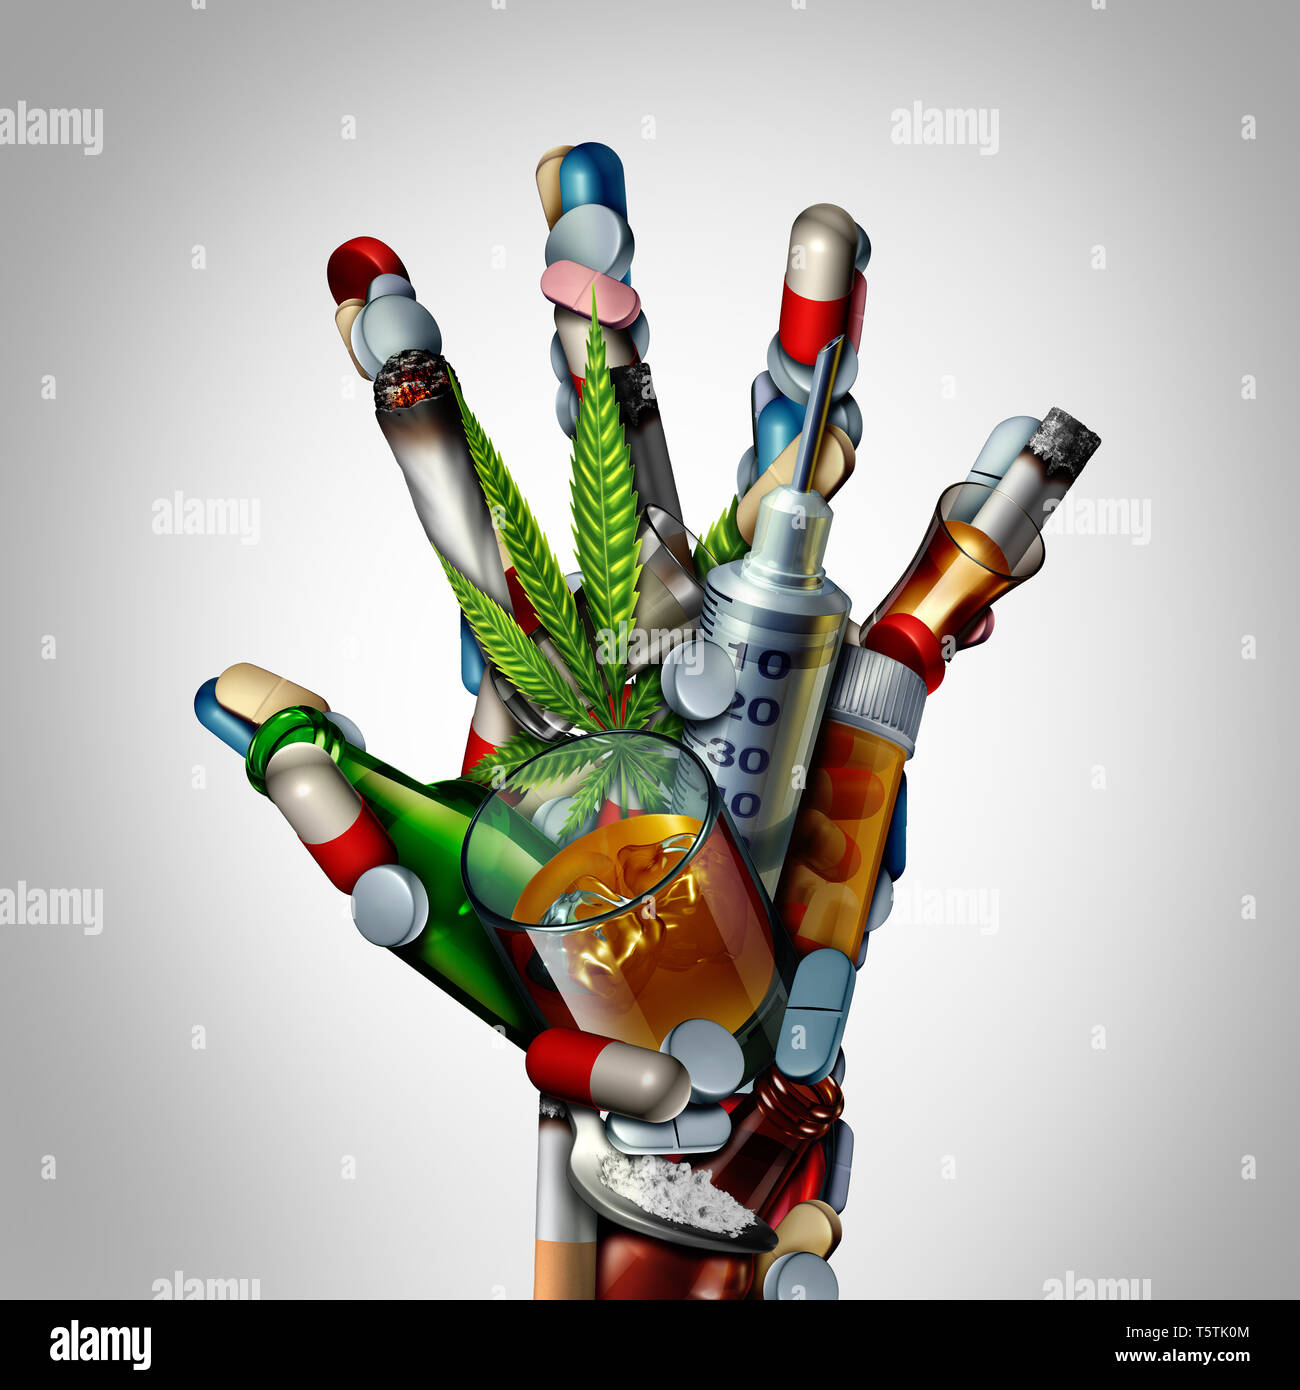 Stop drugs hand or no drug addiction icon as a health issue representing the dangers and risk of smoking drinking alcohol and medicine overdose. Stock Photo